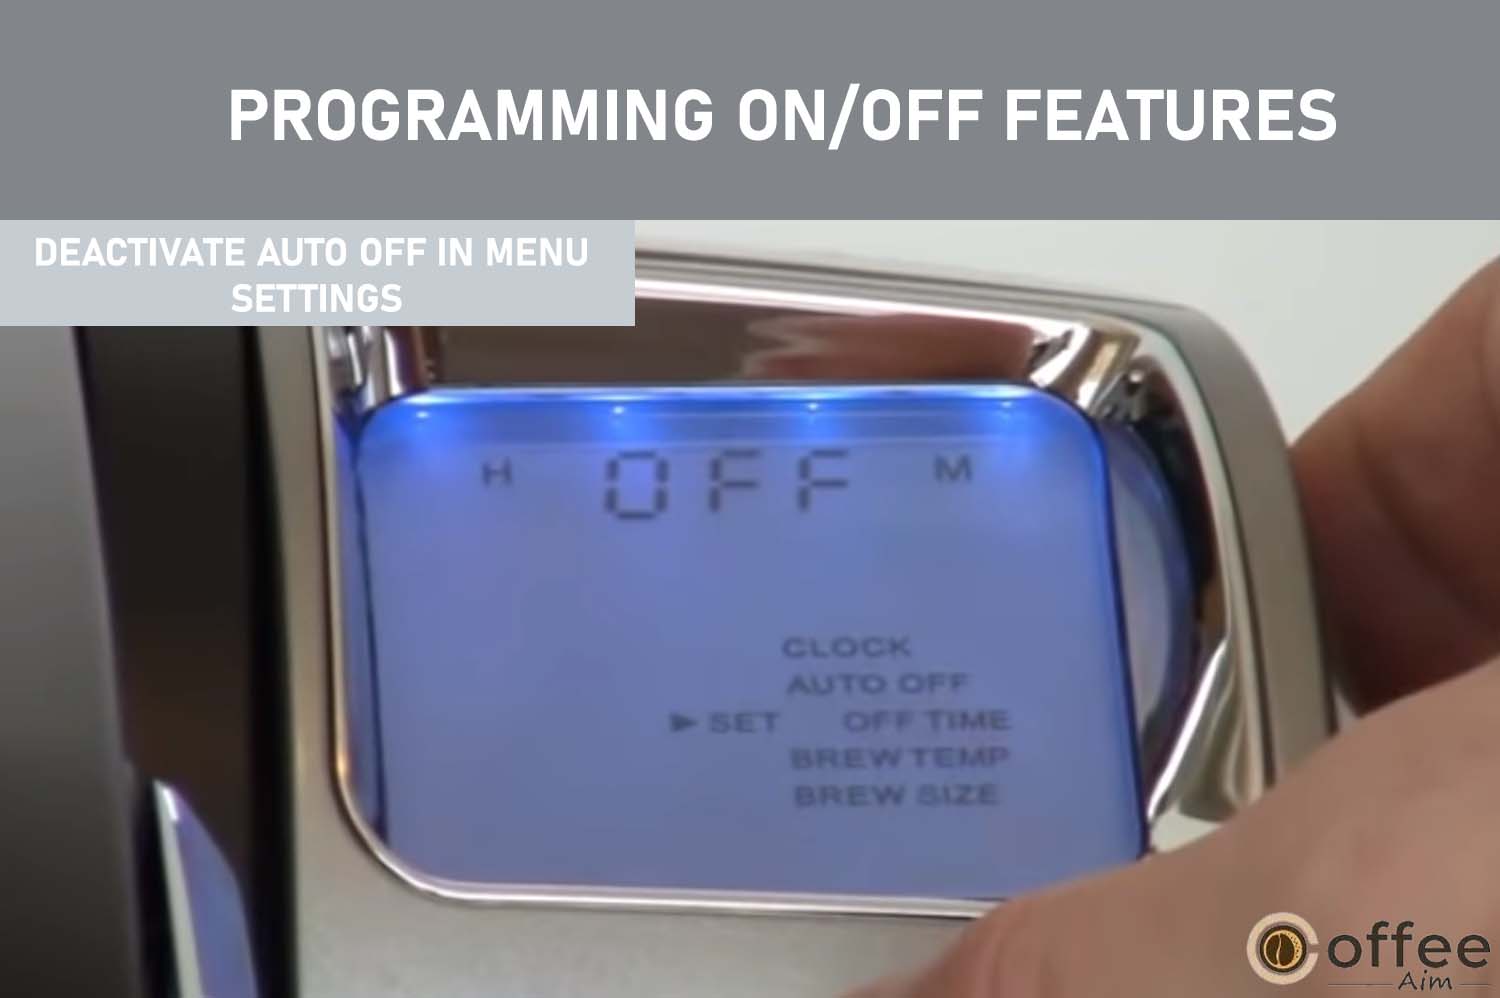 To deactivate the Auto Off function, access the "AUTO OFF" programming mode via the MENU Button. Press the Left Button under the flashing "H" repeatedly until "OFF" is displayed, indicating successful cancellation.